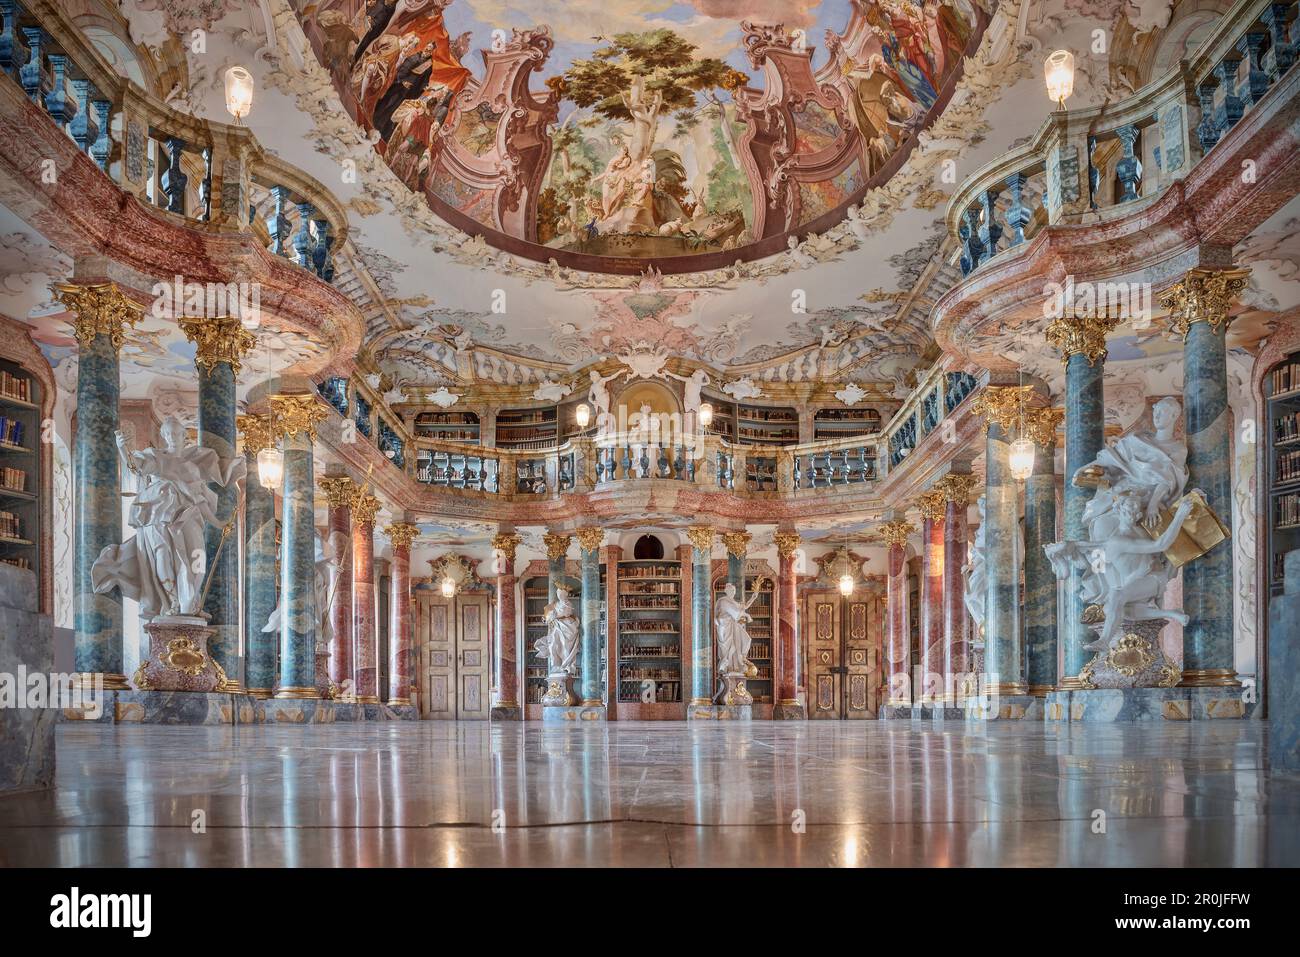 splendid library with columns, sculptures and ceiling frescos, Wiblingen Monastry, Ulm at Danube River, Swabian Alb, Baden-Wuerttemberg, Germany Stock Photo